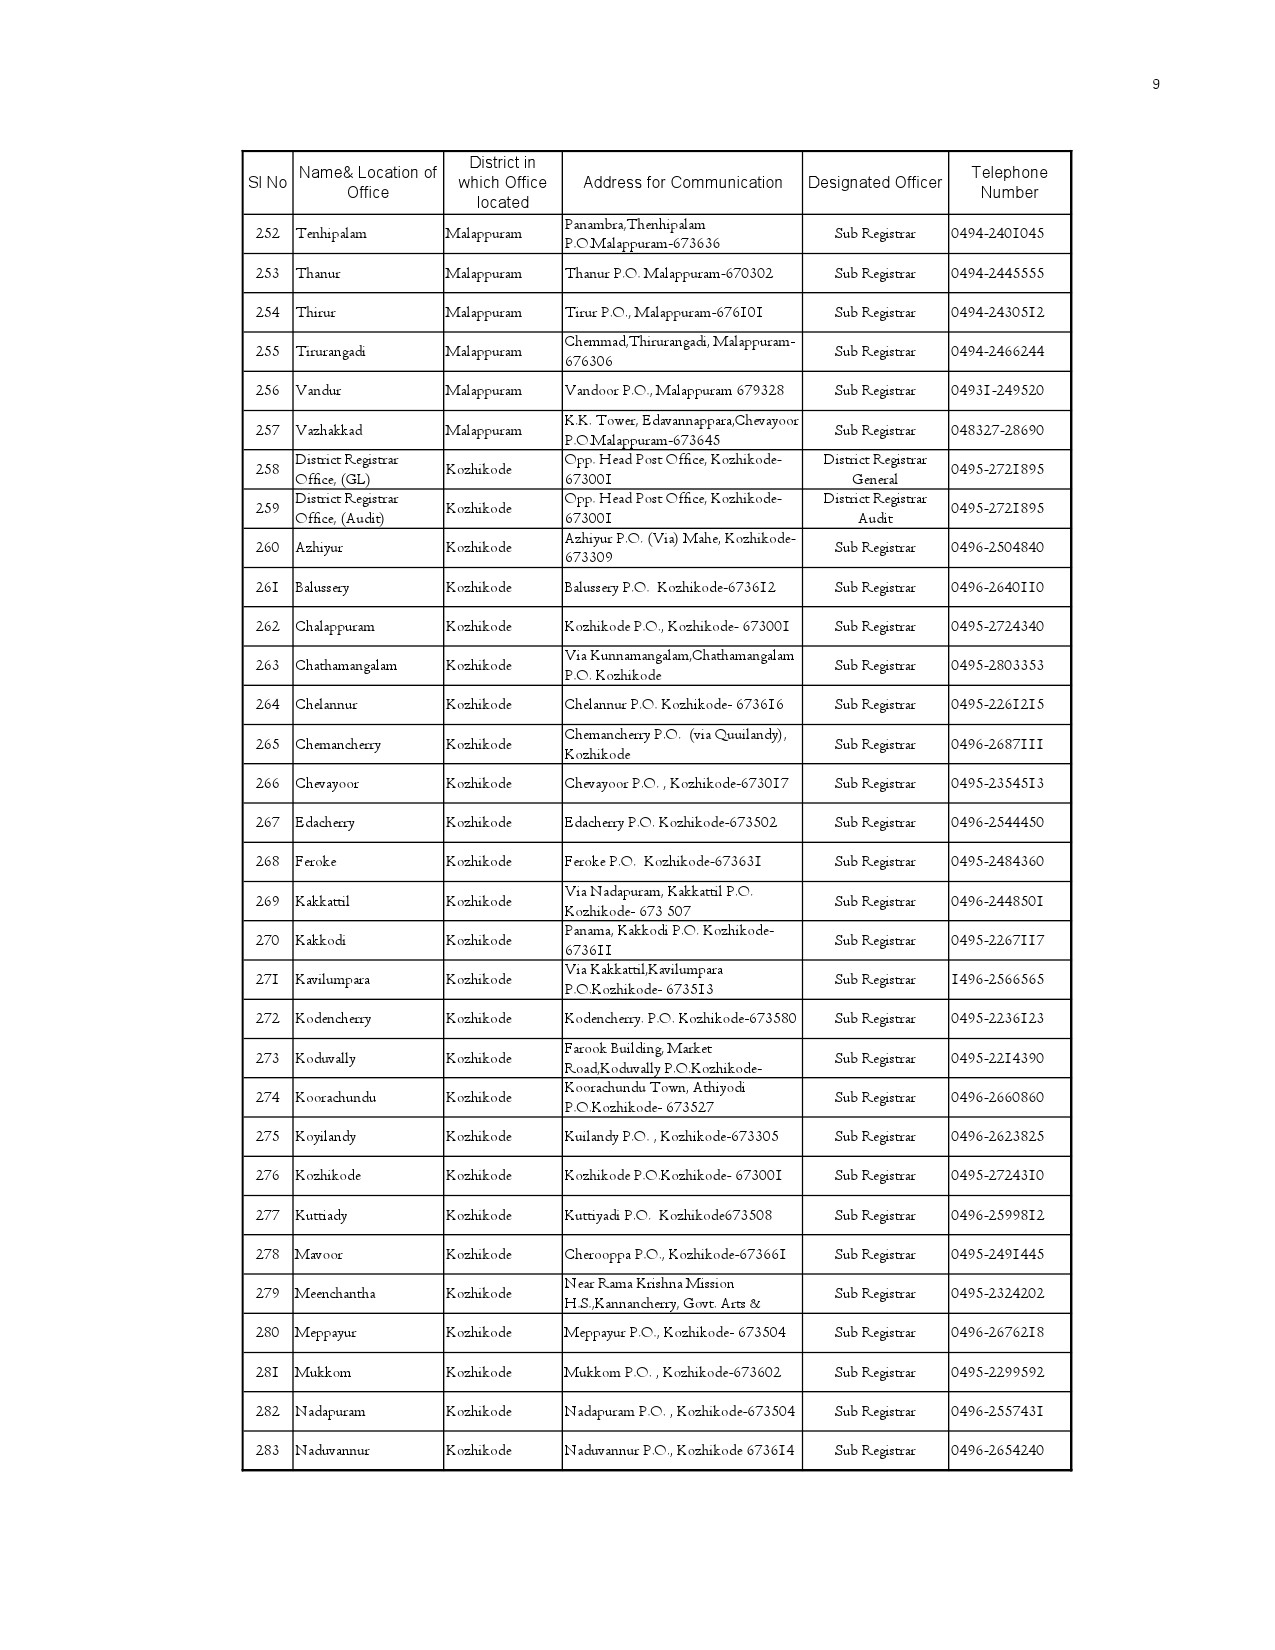 List of Offices in Kerala under the Department of Registration - Notification Image 9